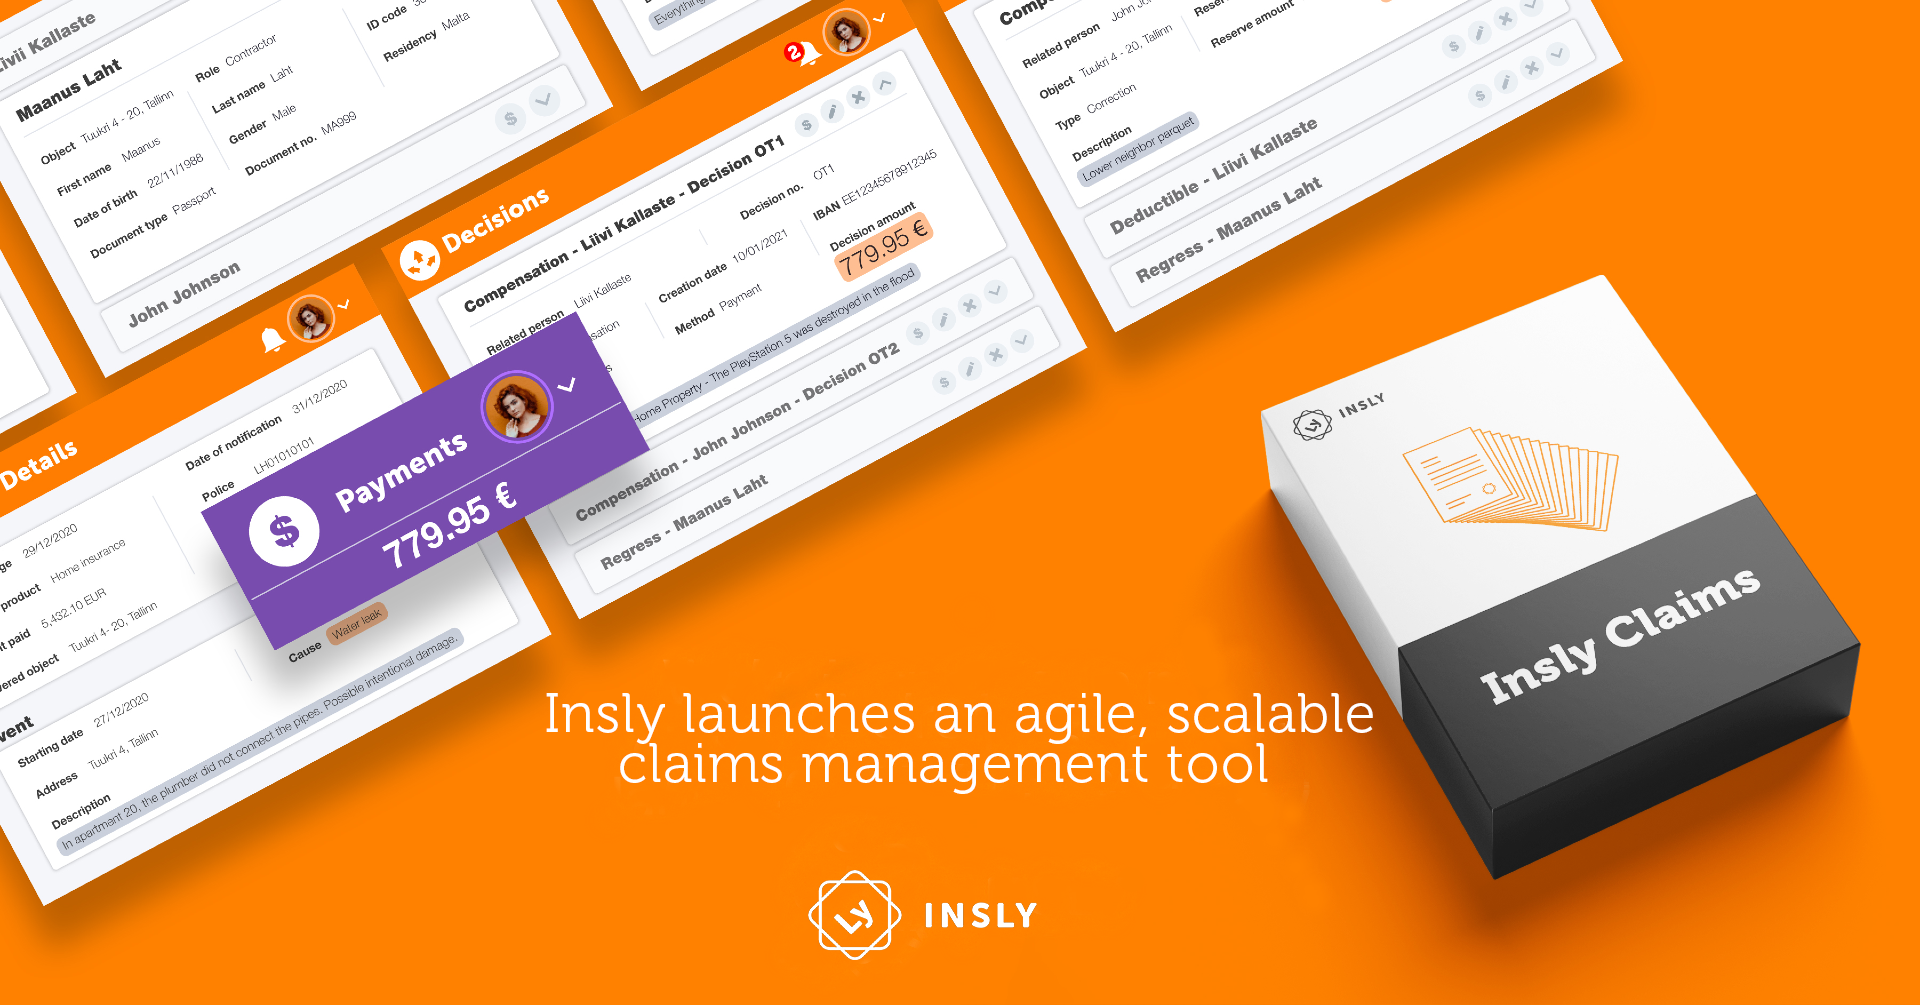 Claims management tool